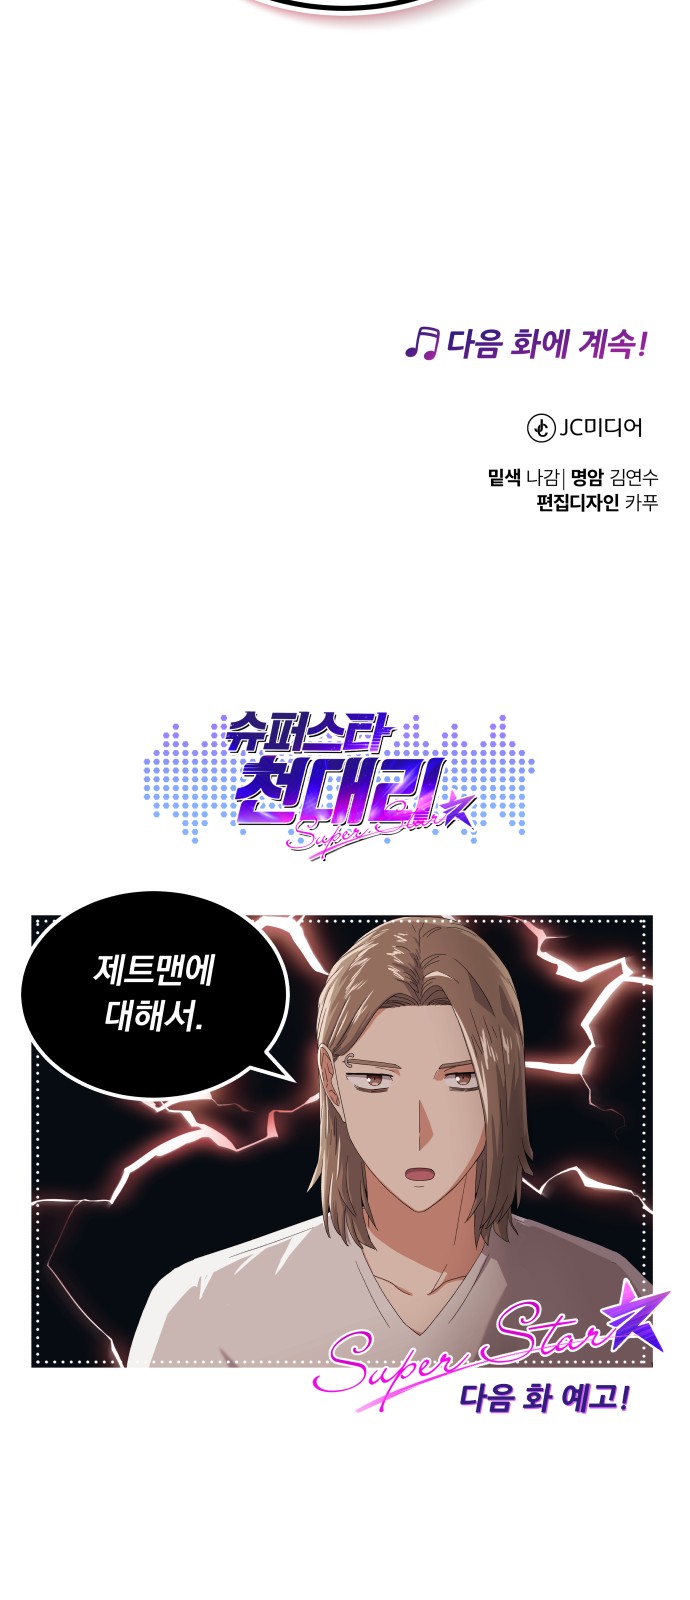 Superstar Cheon Dae-ri - Chapter 25 - Page 75